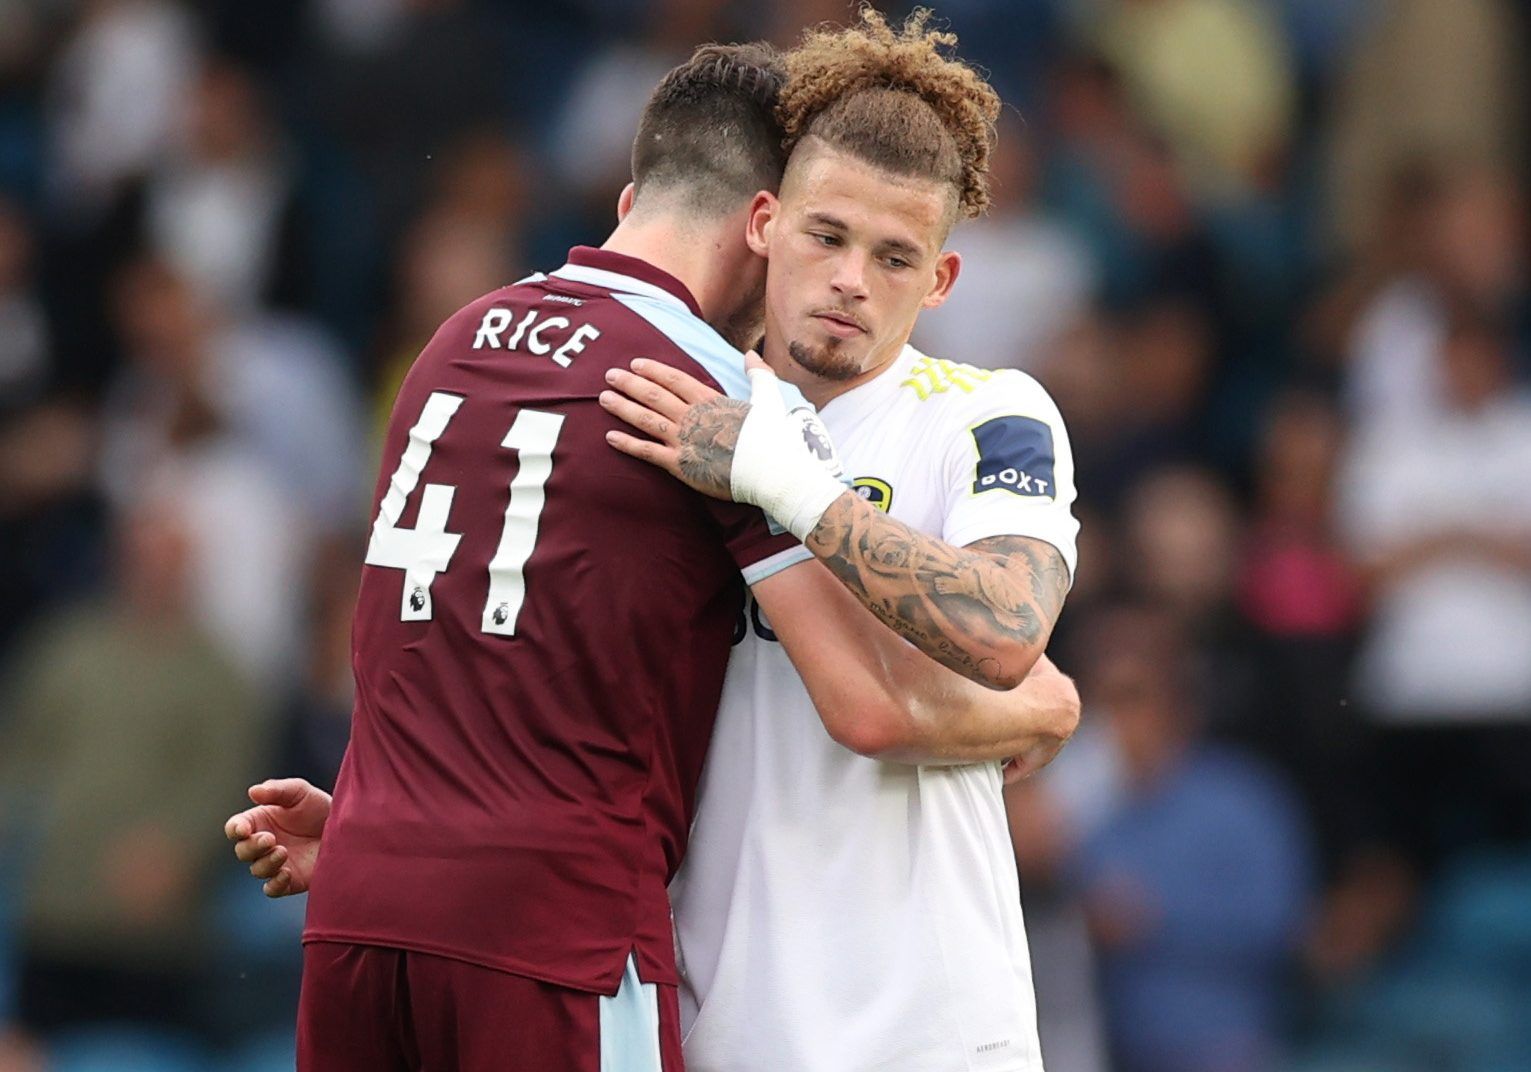 Soccer Football - Premier League - Leeds United v West Ham United - Elland Road, Leeds, Britain - September 25, 2021  West Ham United's Declan Rice with Leeds United's Kalvin Phillips after the match Action Images via Reuters/Lee Smith EDITORIAL USE ONLY. No use with unauthorized audio, video, data, fixture lists, club/league logos or 'live' services. Online in-match use limited to 75 images, no video emulation. No use in betting, games or single club /league/player publications.  Please contact